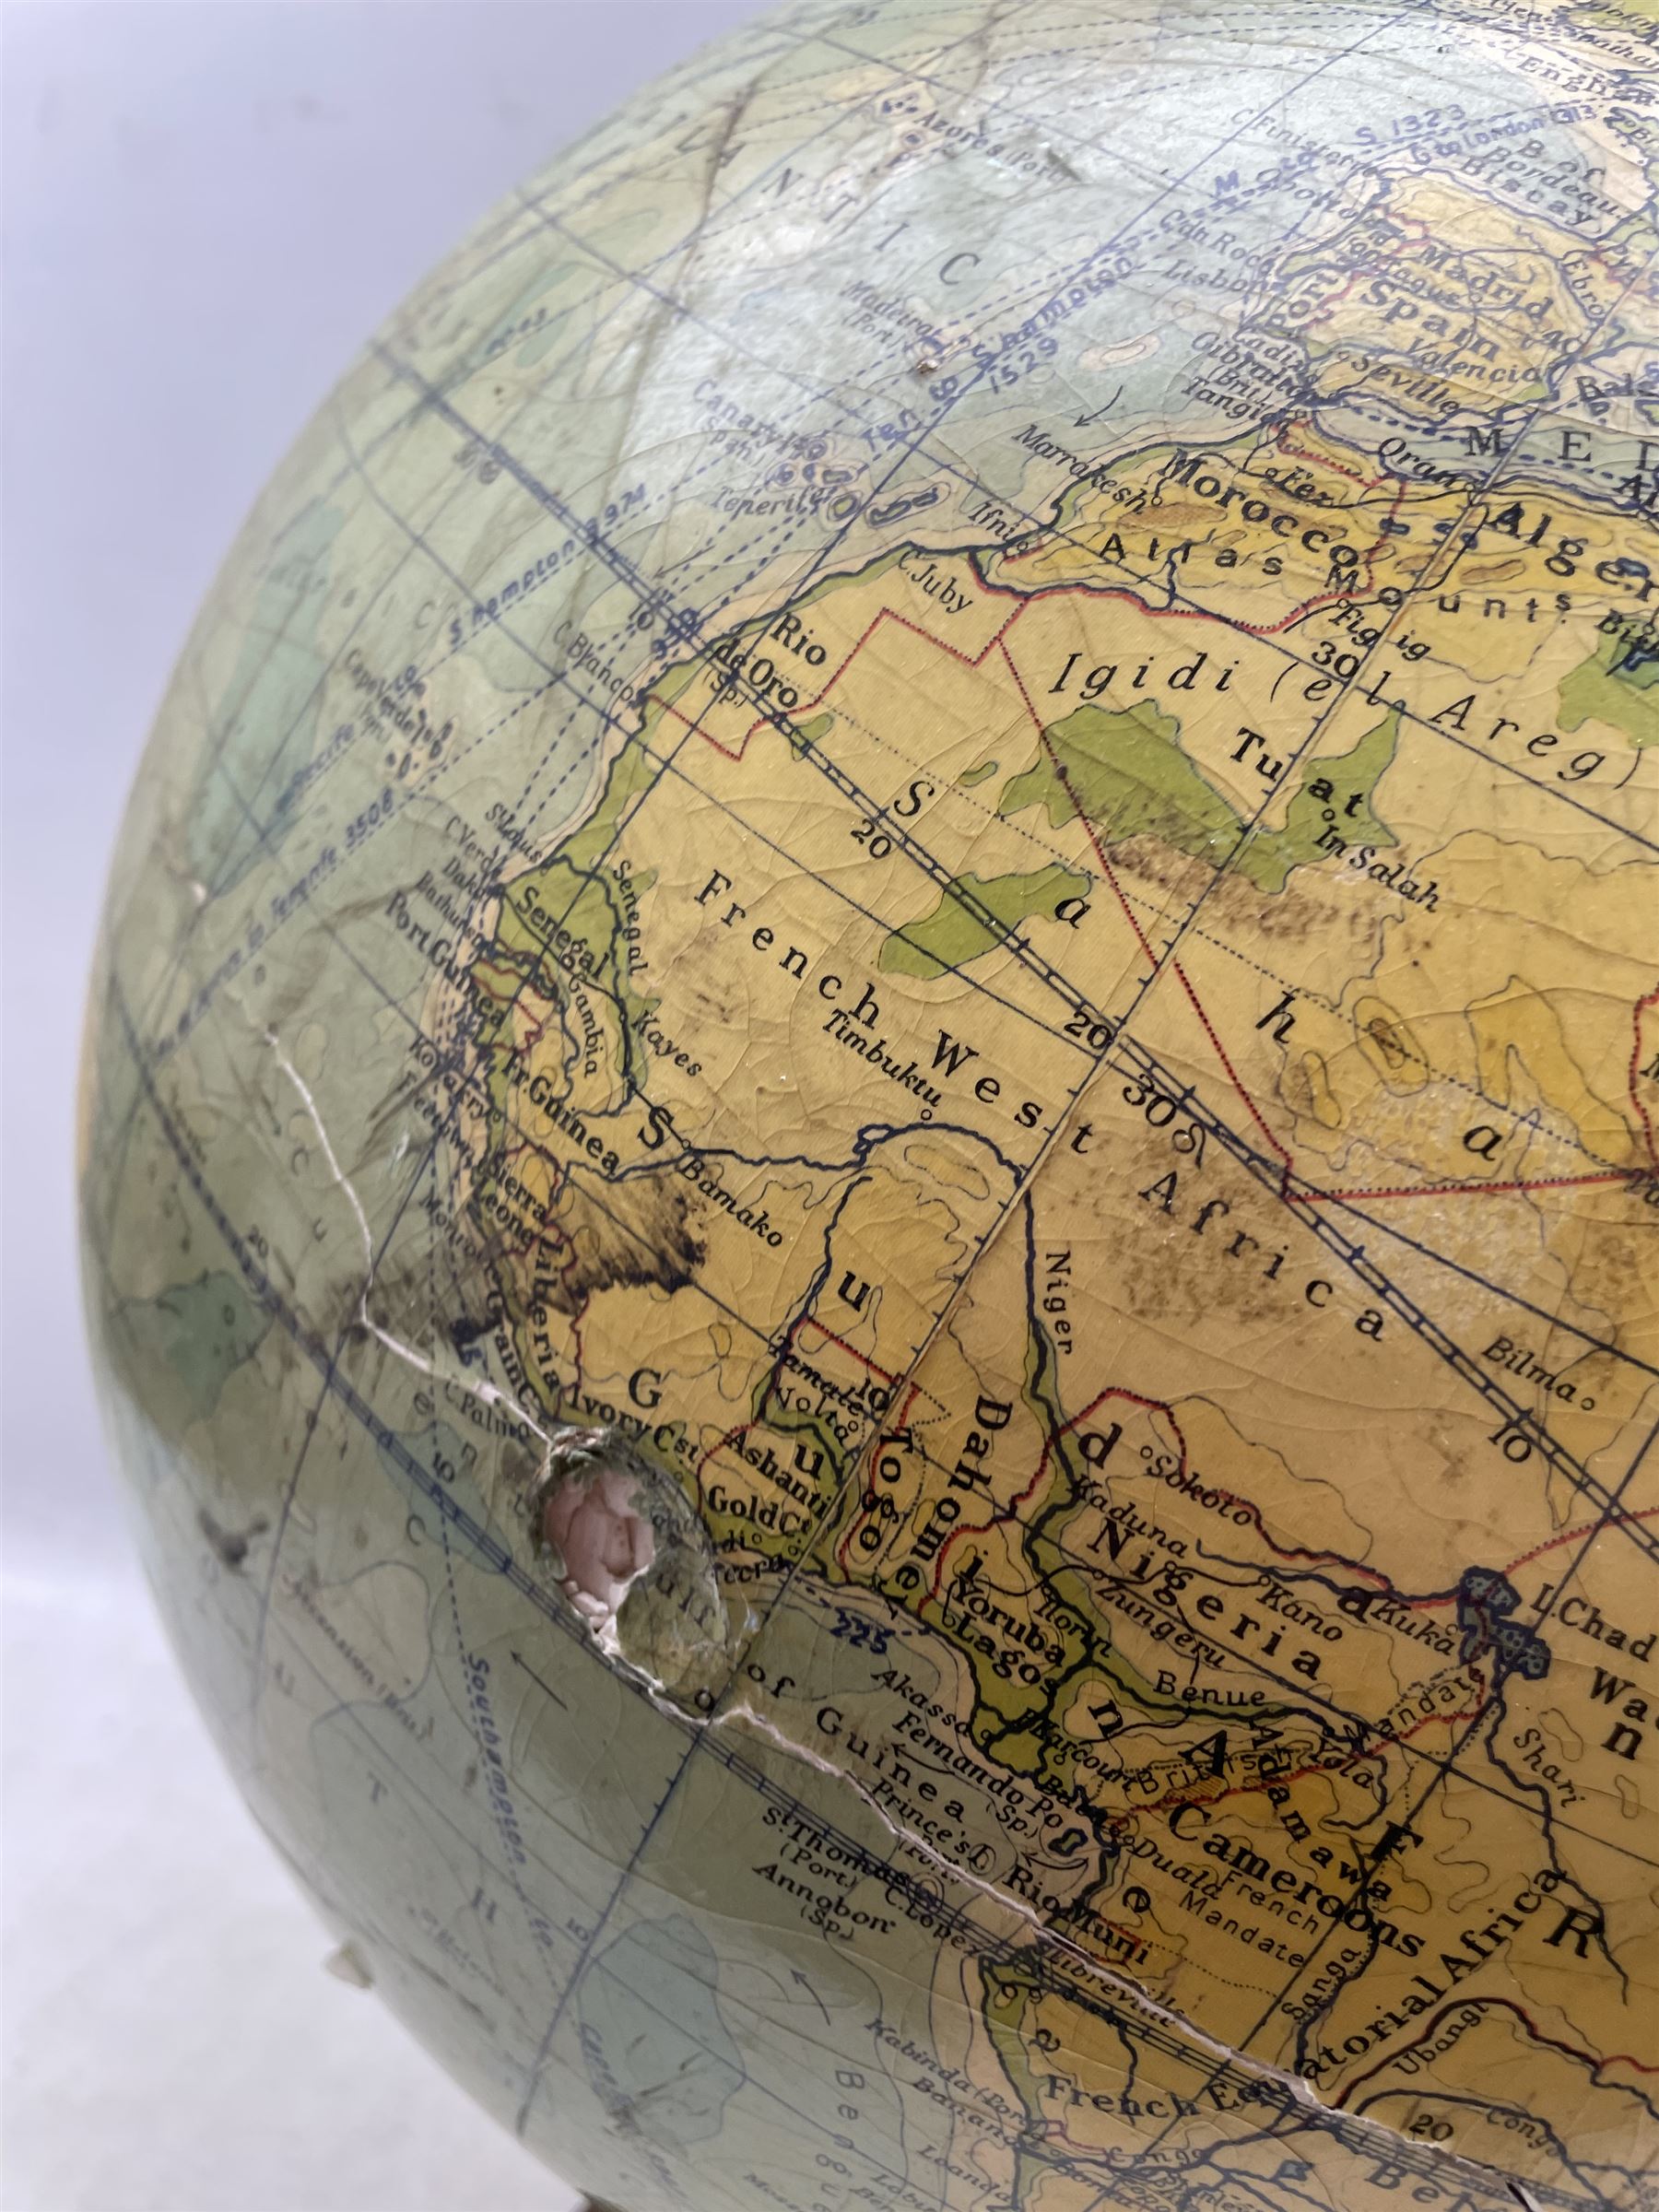 Phillips 14 Inch Terrestrial Globe by George Philip & Son Ltd for the London Geographical Institute - Image 2 of 4